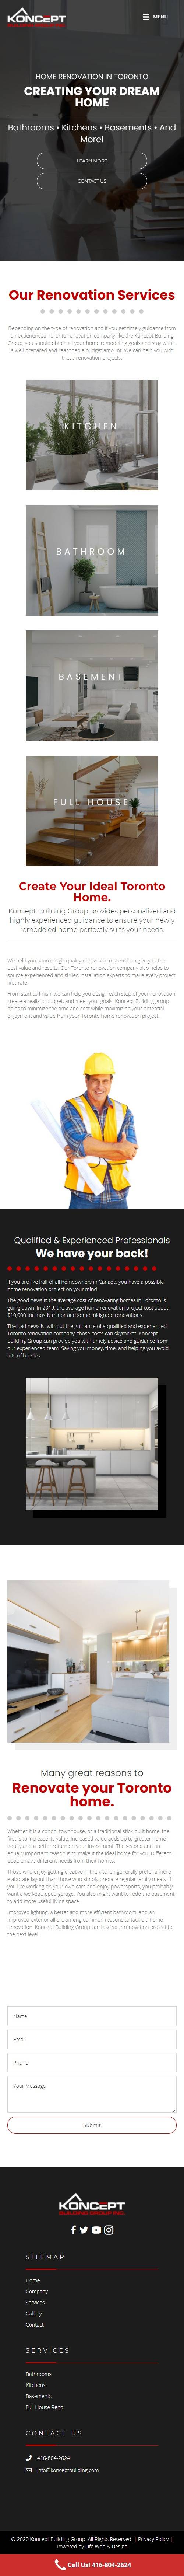 mobile view web design project for home renovation company in Toronto Ontario